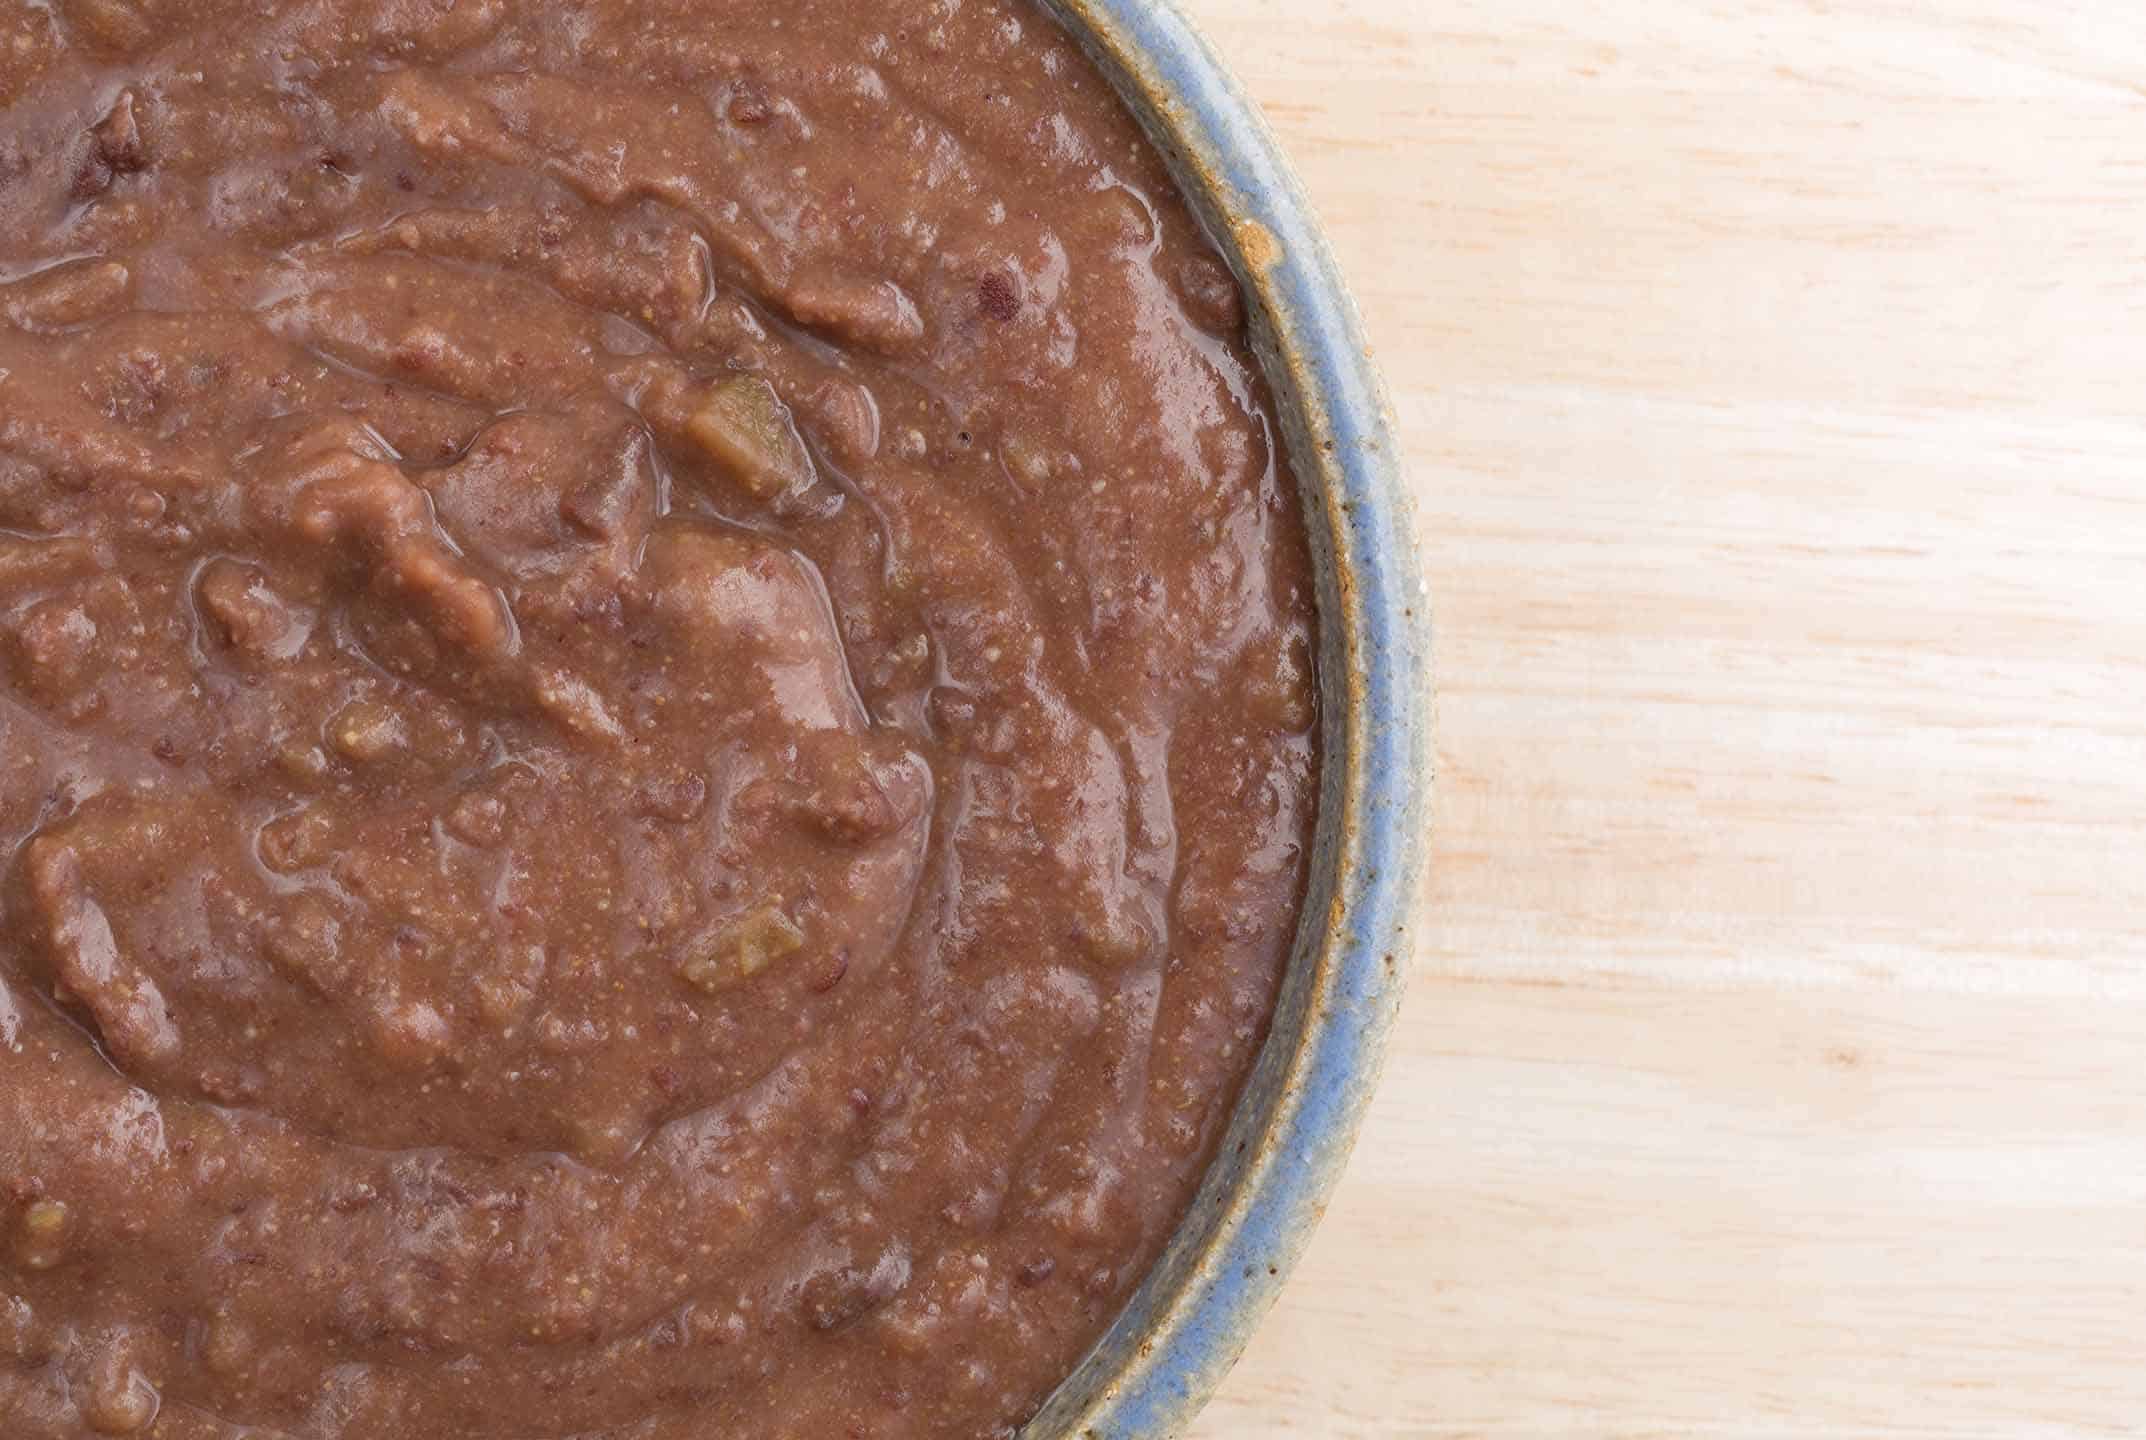 black bean dip 6 - Oil-Free Hummus Recipe Roundup: All the Flavor Without the Added Fat